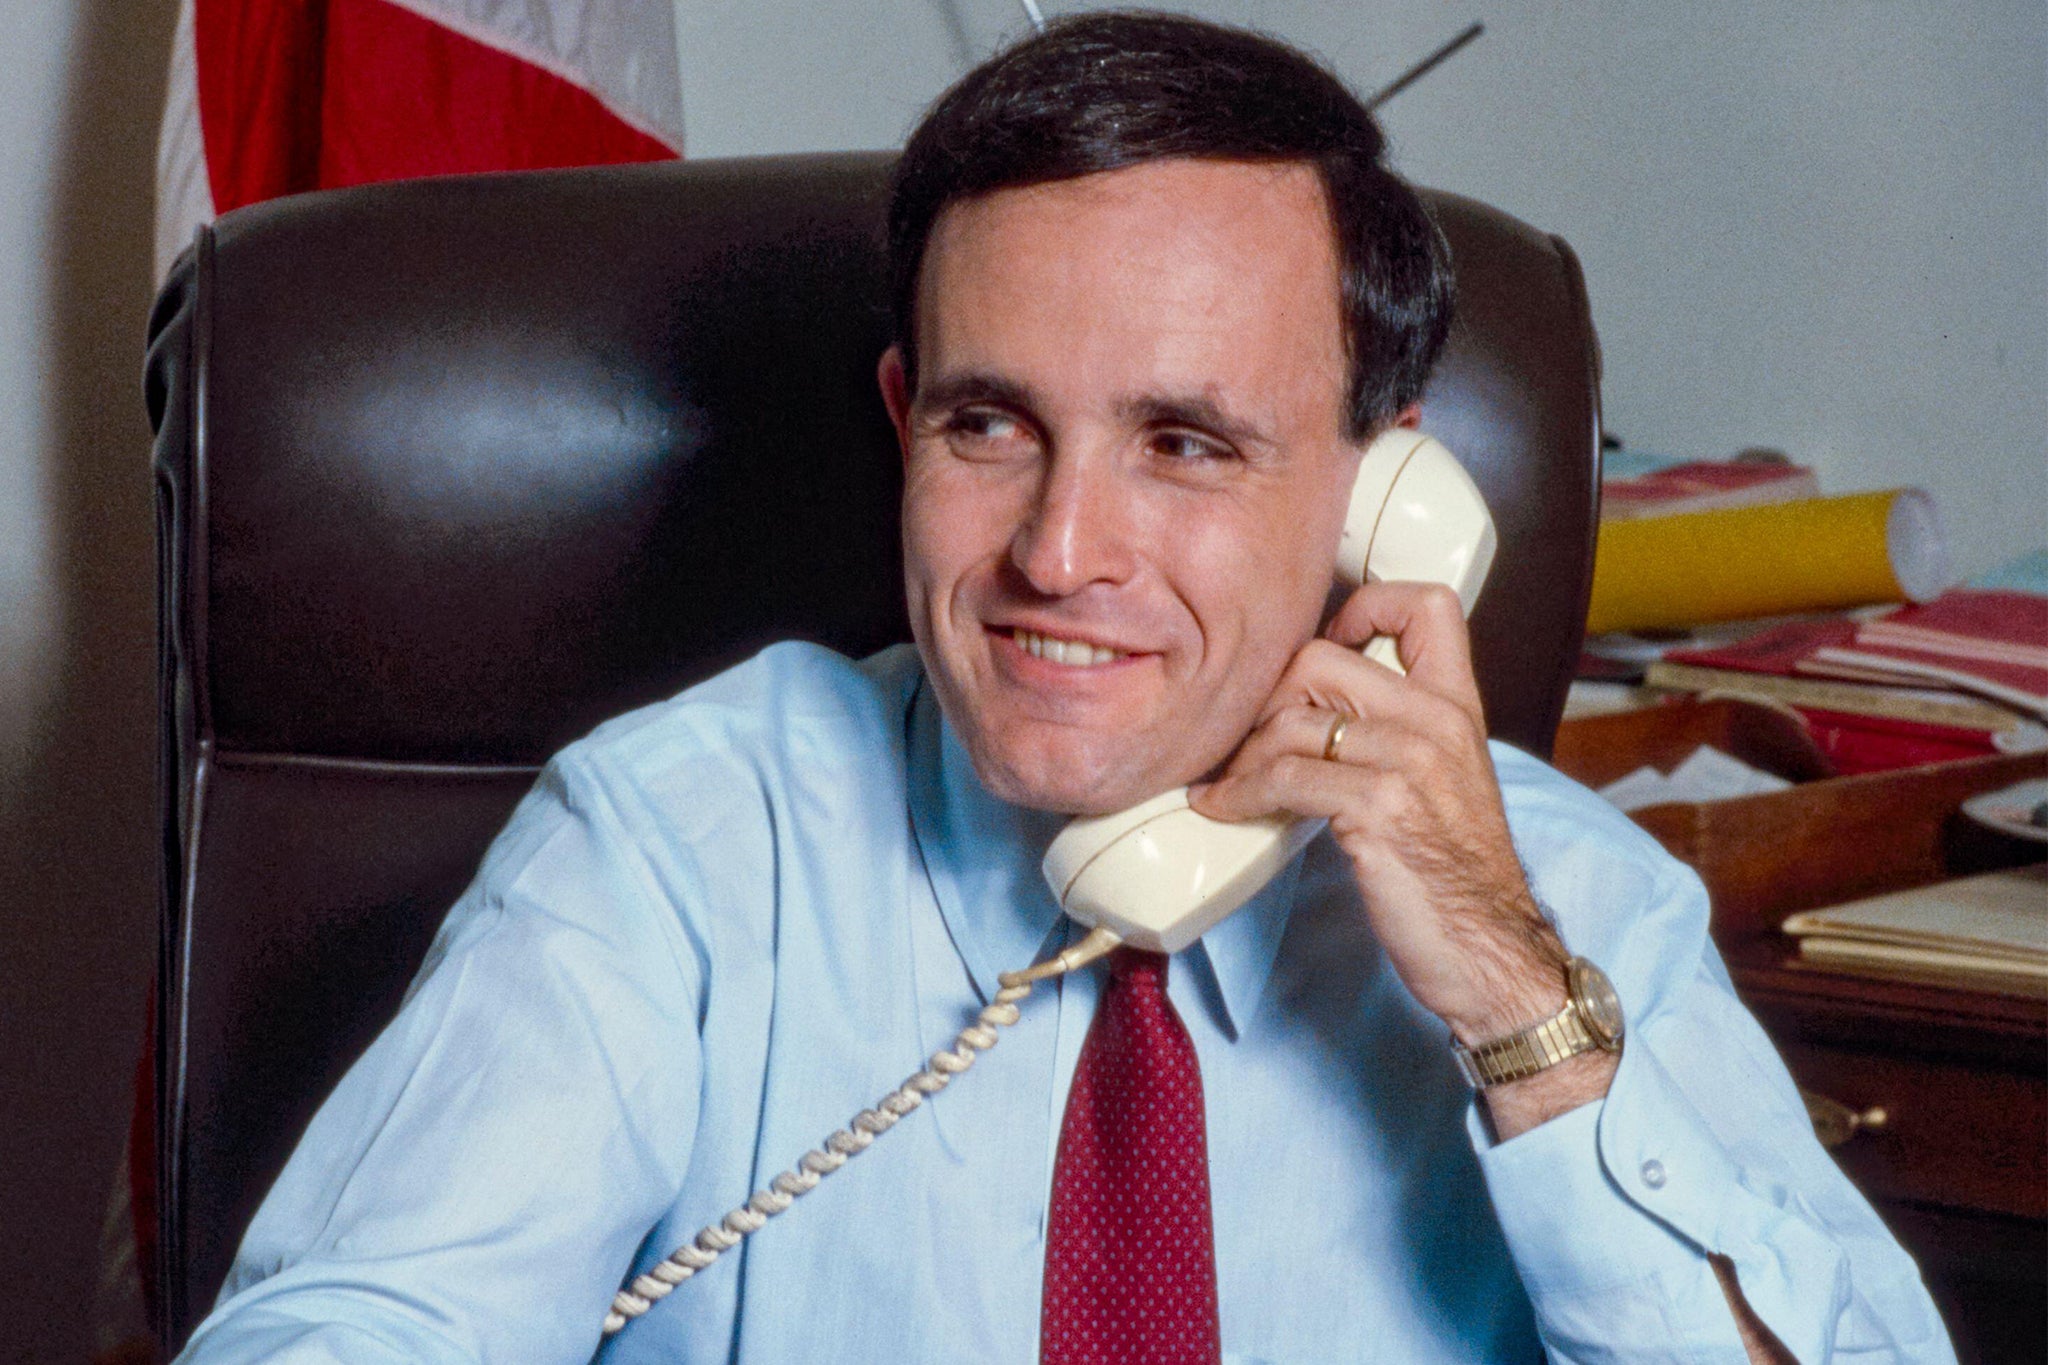 Rudy Giuliani, here seen in 1984, served as a US attorney between 1983 and 1989. He rode his success as a prosecutor all the way to the New York mayoralty